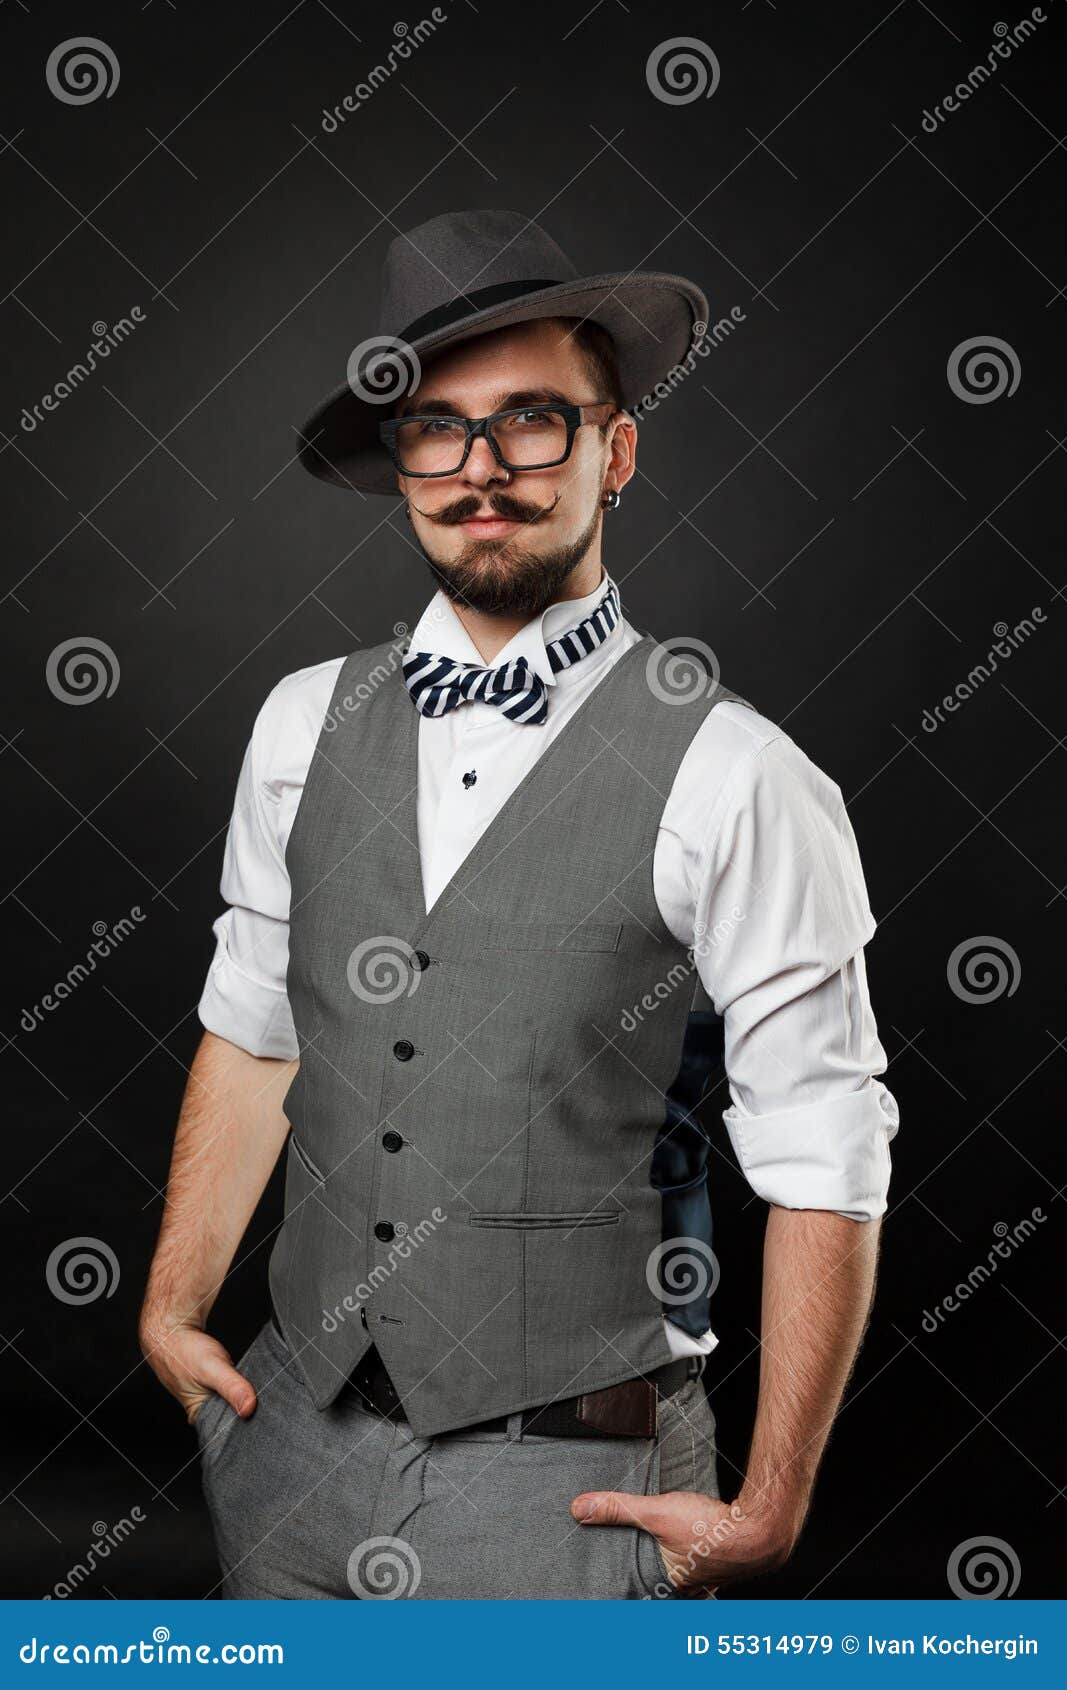 Handsome Guy with Beard and Mustache in Suit Stock Image - Image of ...